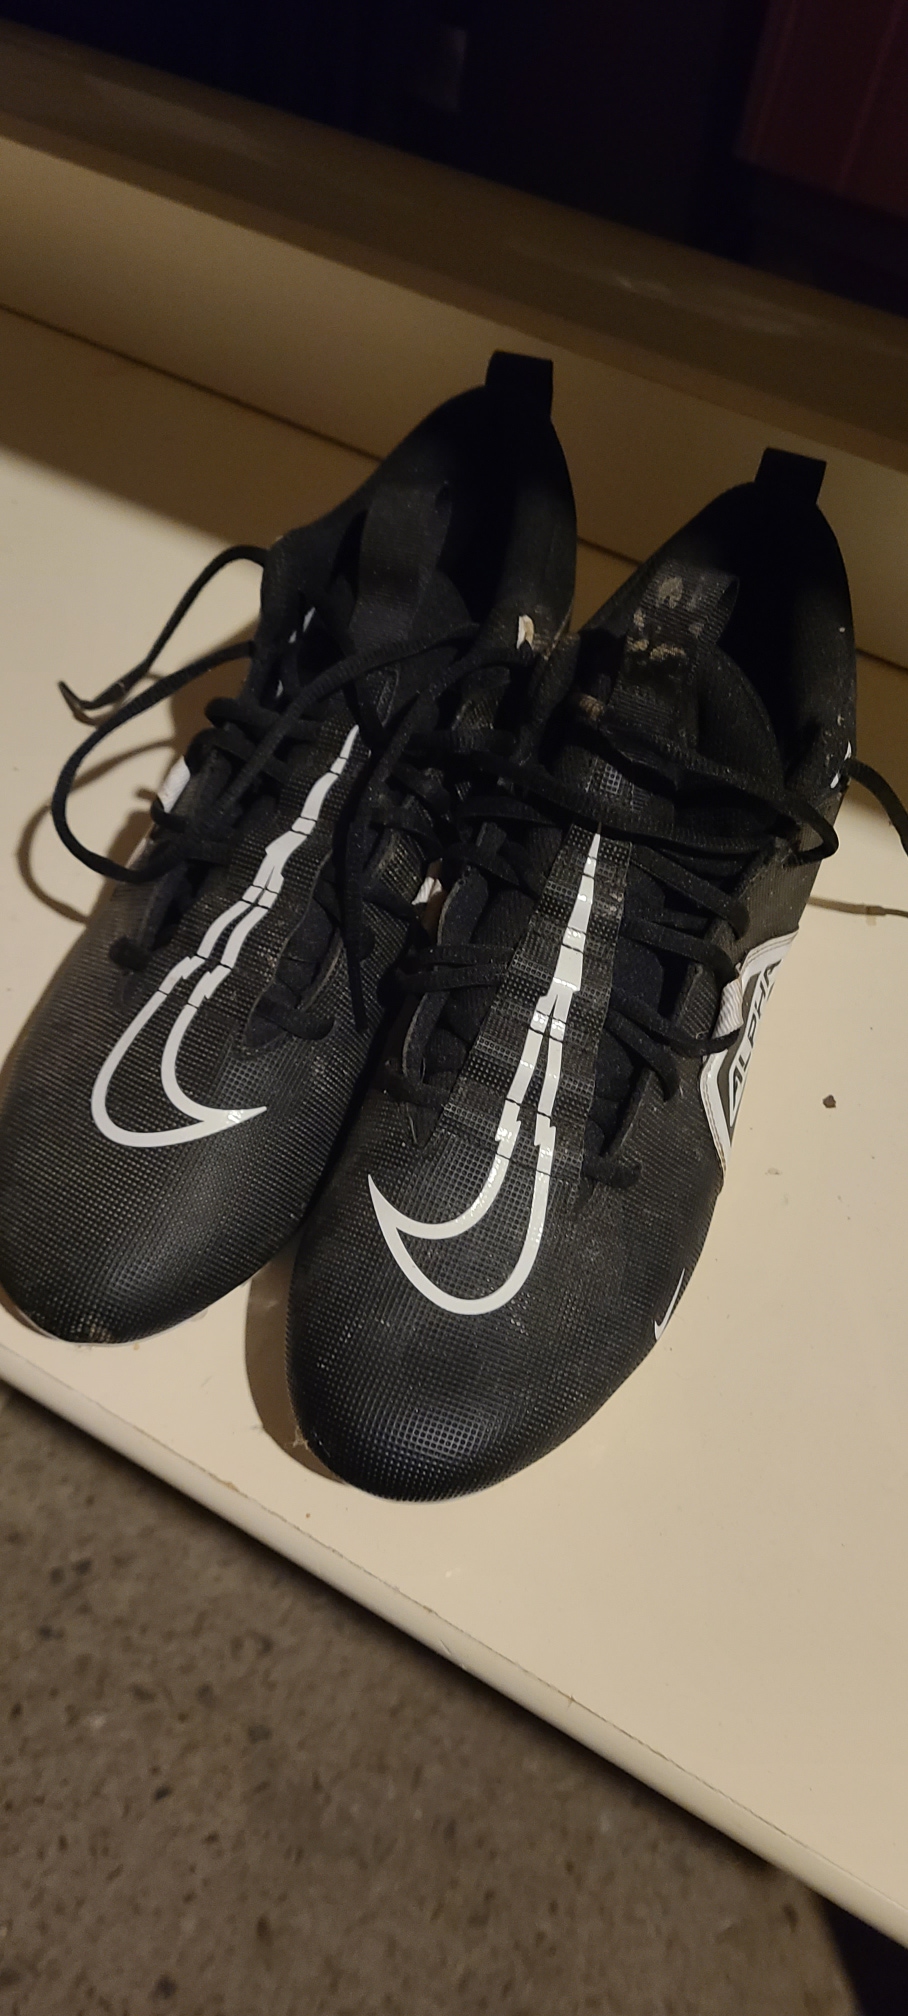 Used Men's Size 12 (Women's 13) Molded Cleats Nike Mid Top